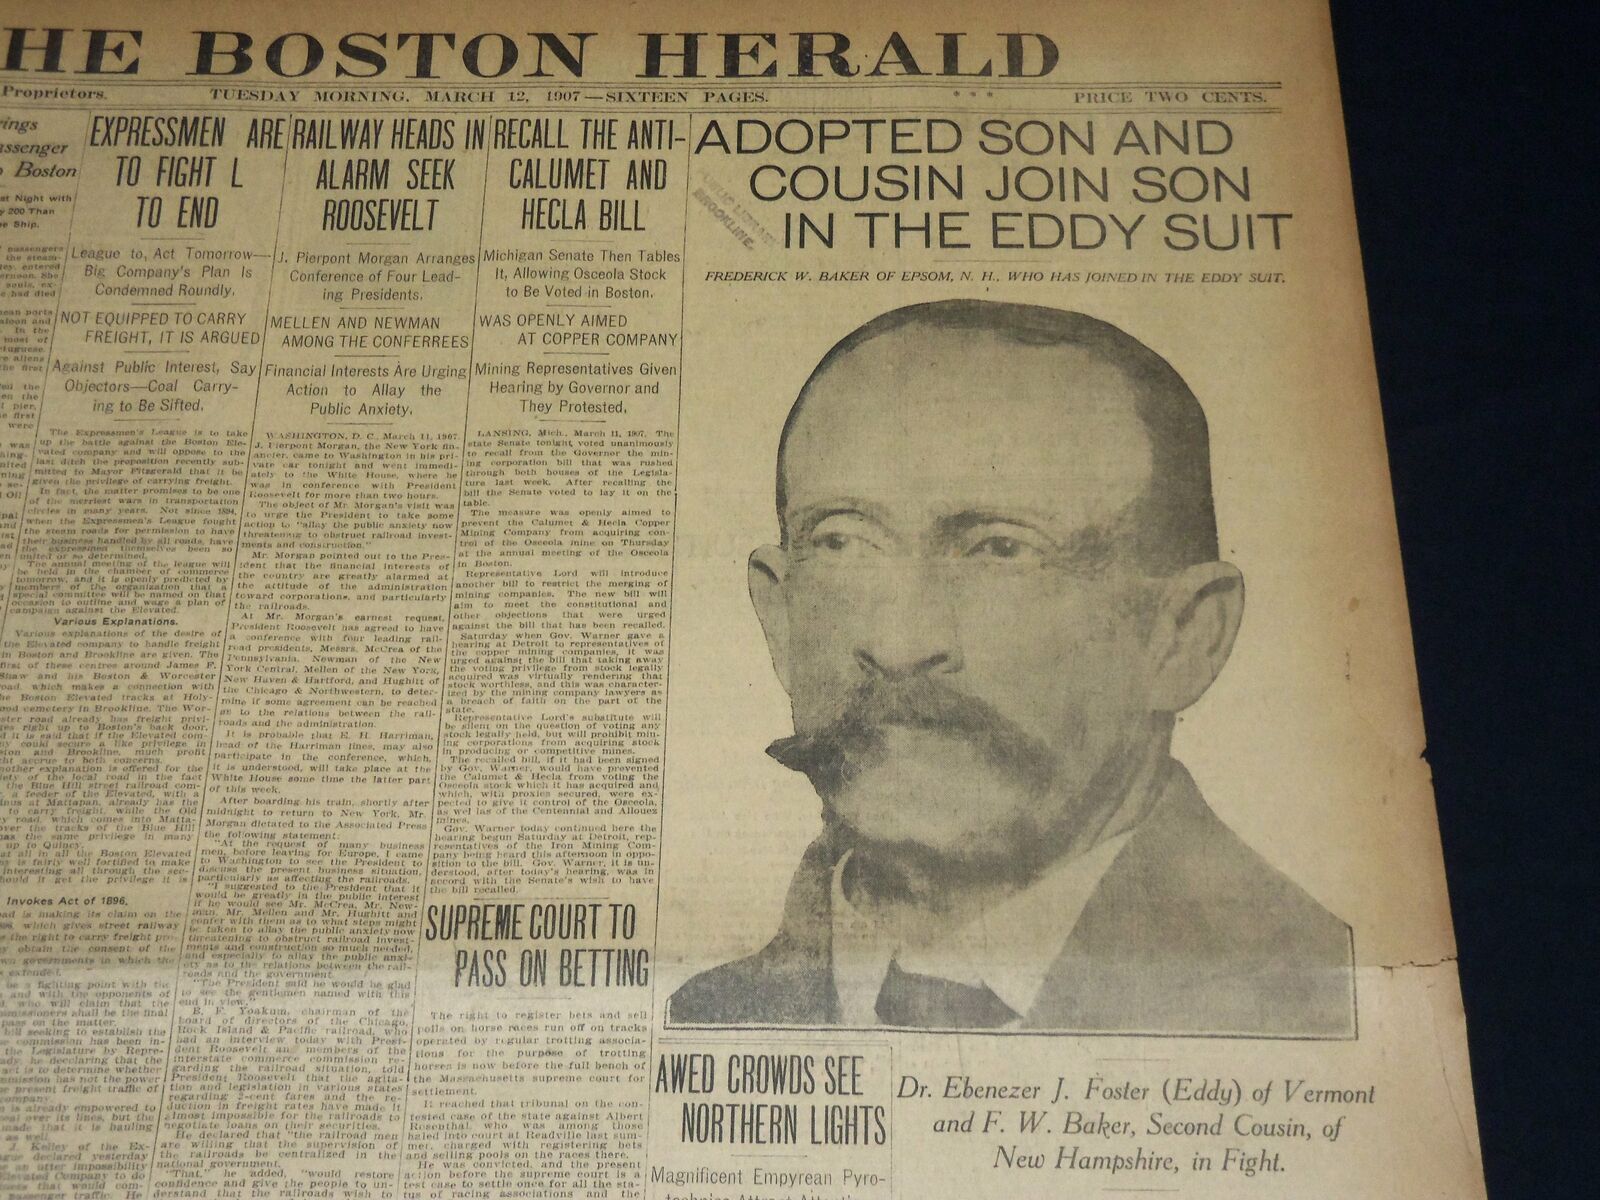 1907 MARCH 12 THE BOSTON HERALD-ADOPTED SON & COUSIN JOIN SON EDDY SUIT - BH 385